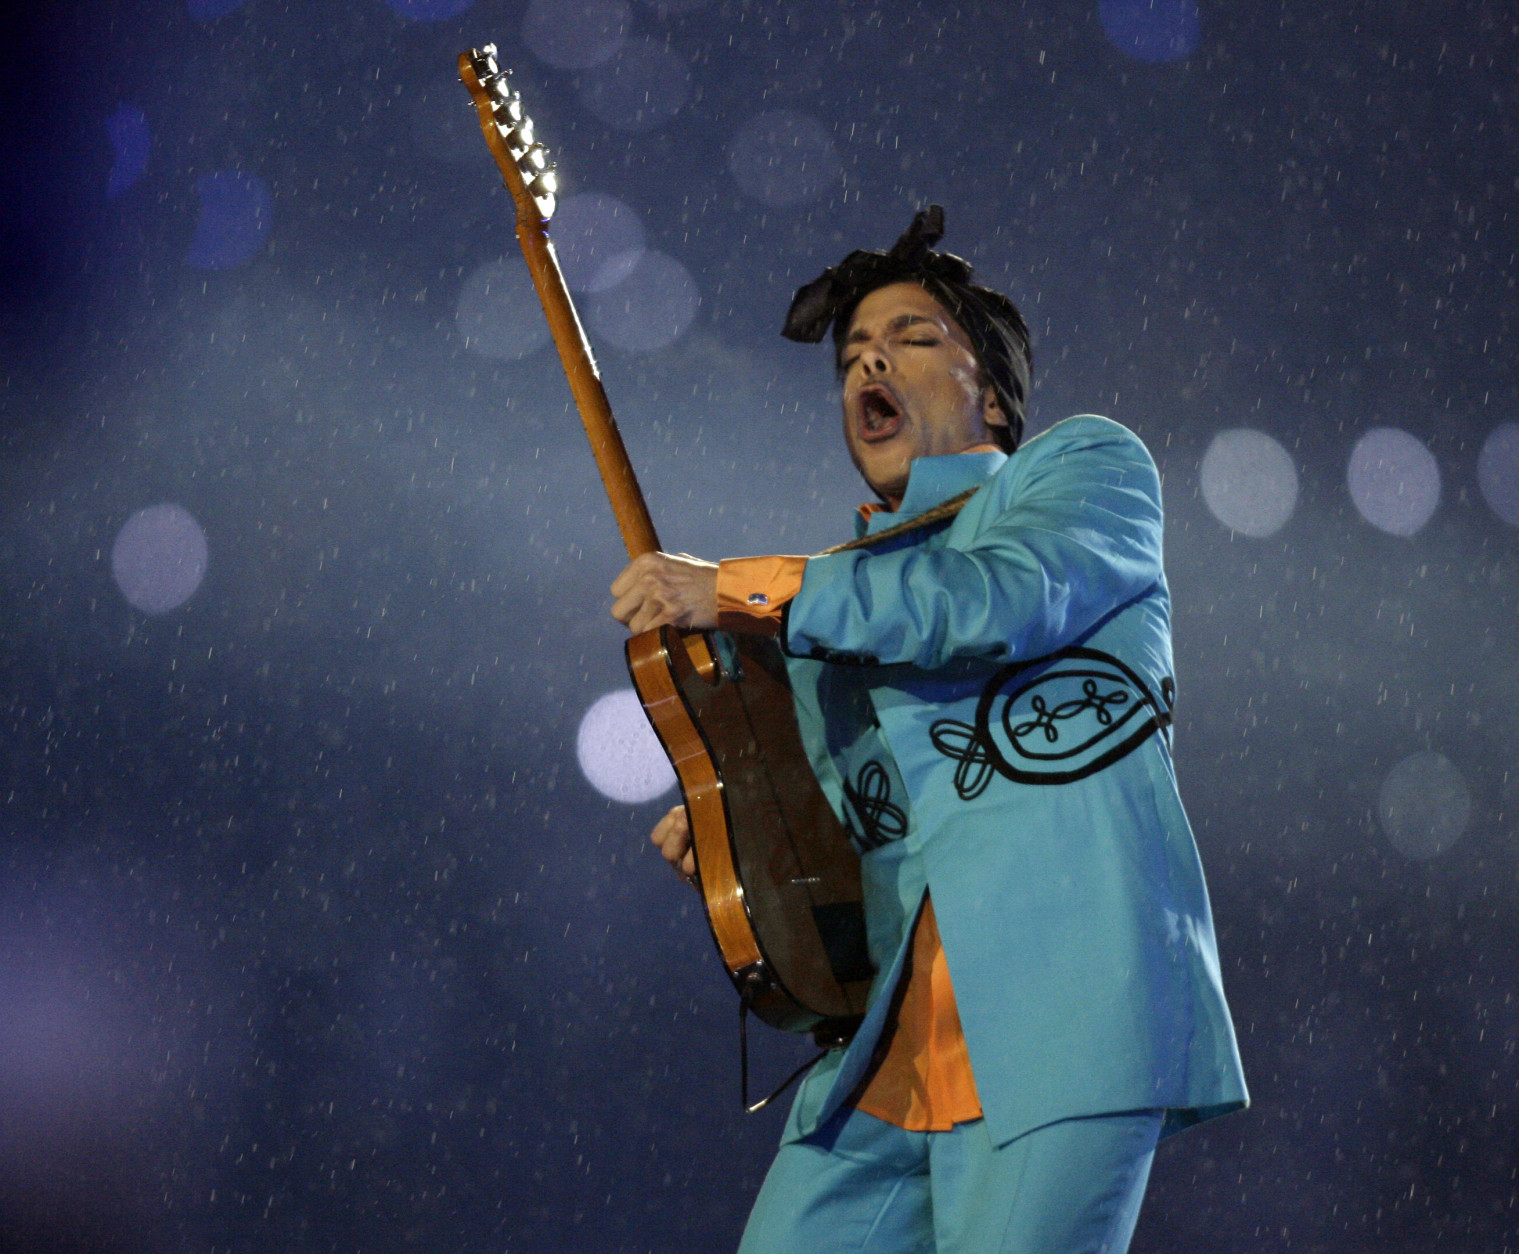 Prince performs during the halftime show at Super Bowl XLI at Dolphin Stadium in Miami, Sunday, Feb. 4, 2007. (AP Photo/Alex Brandon)